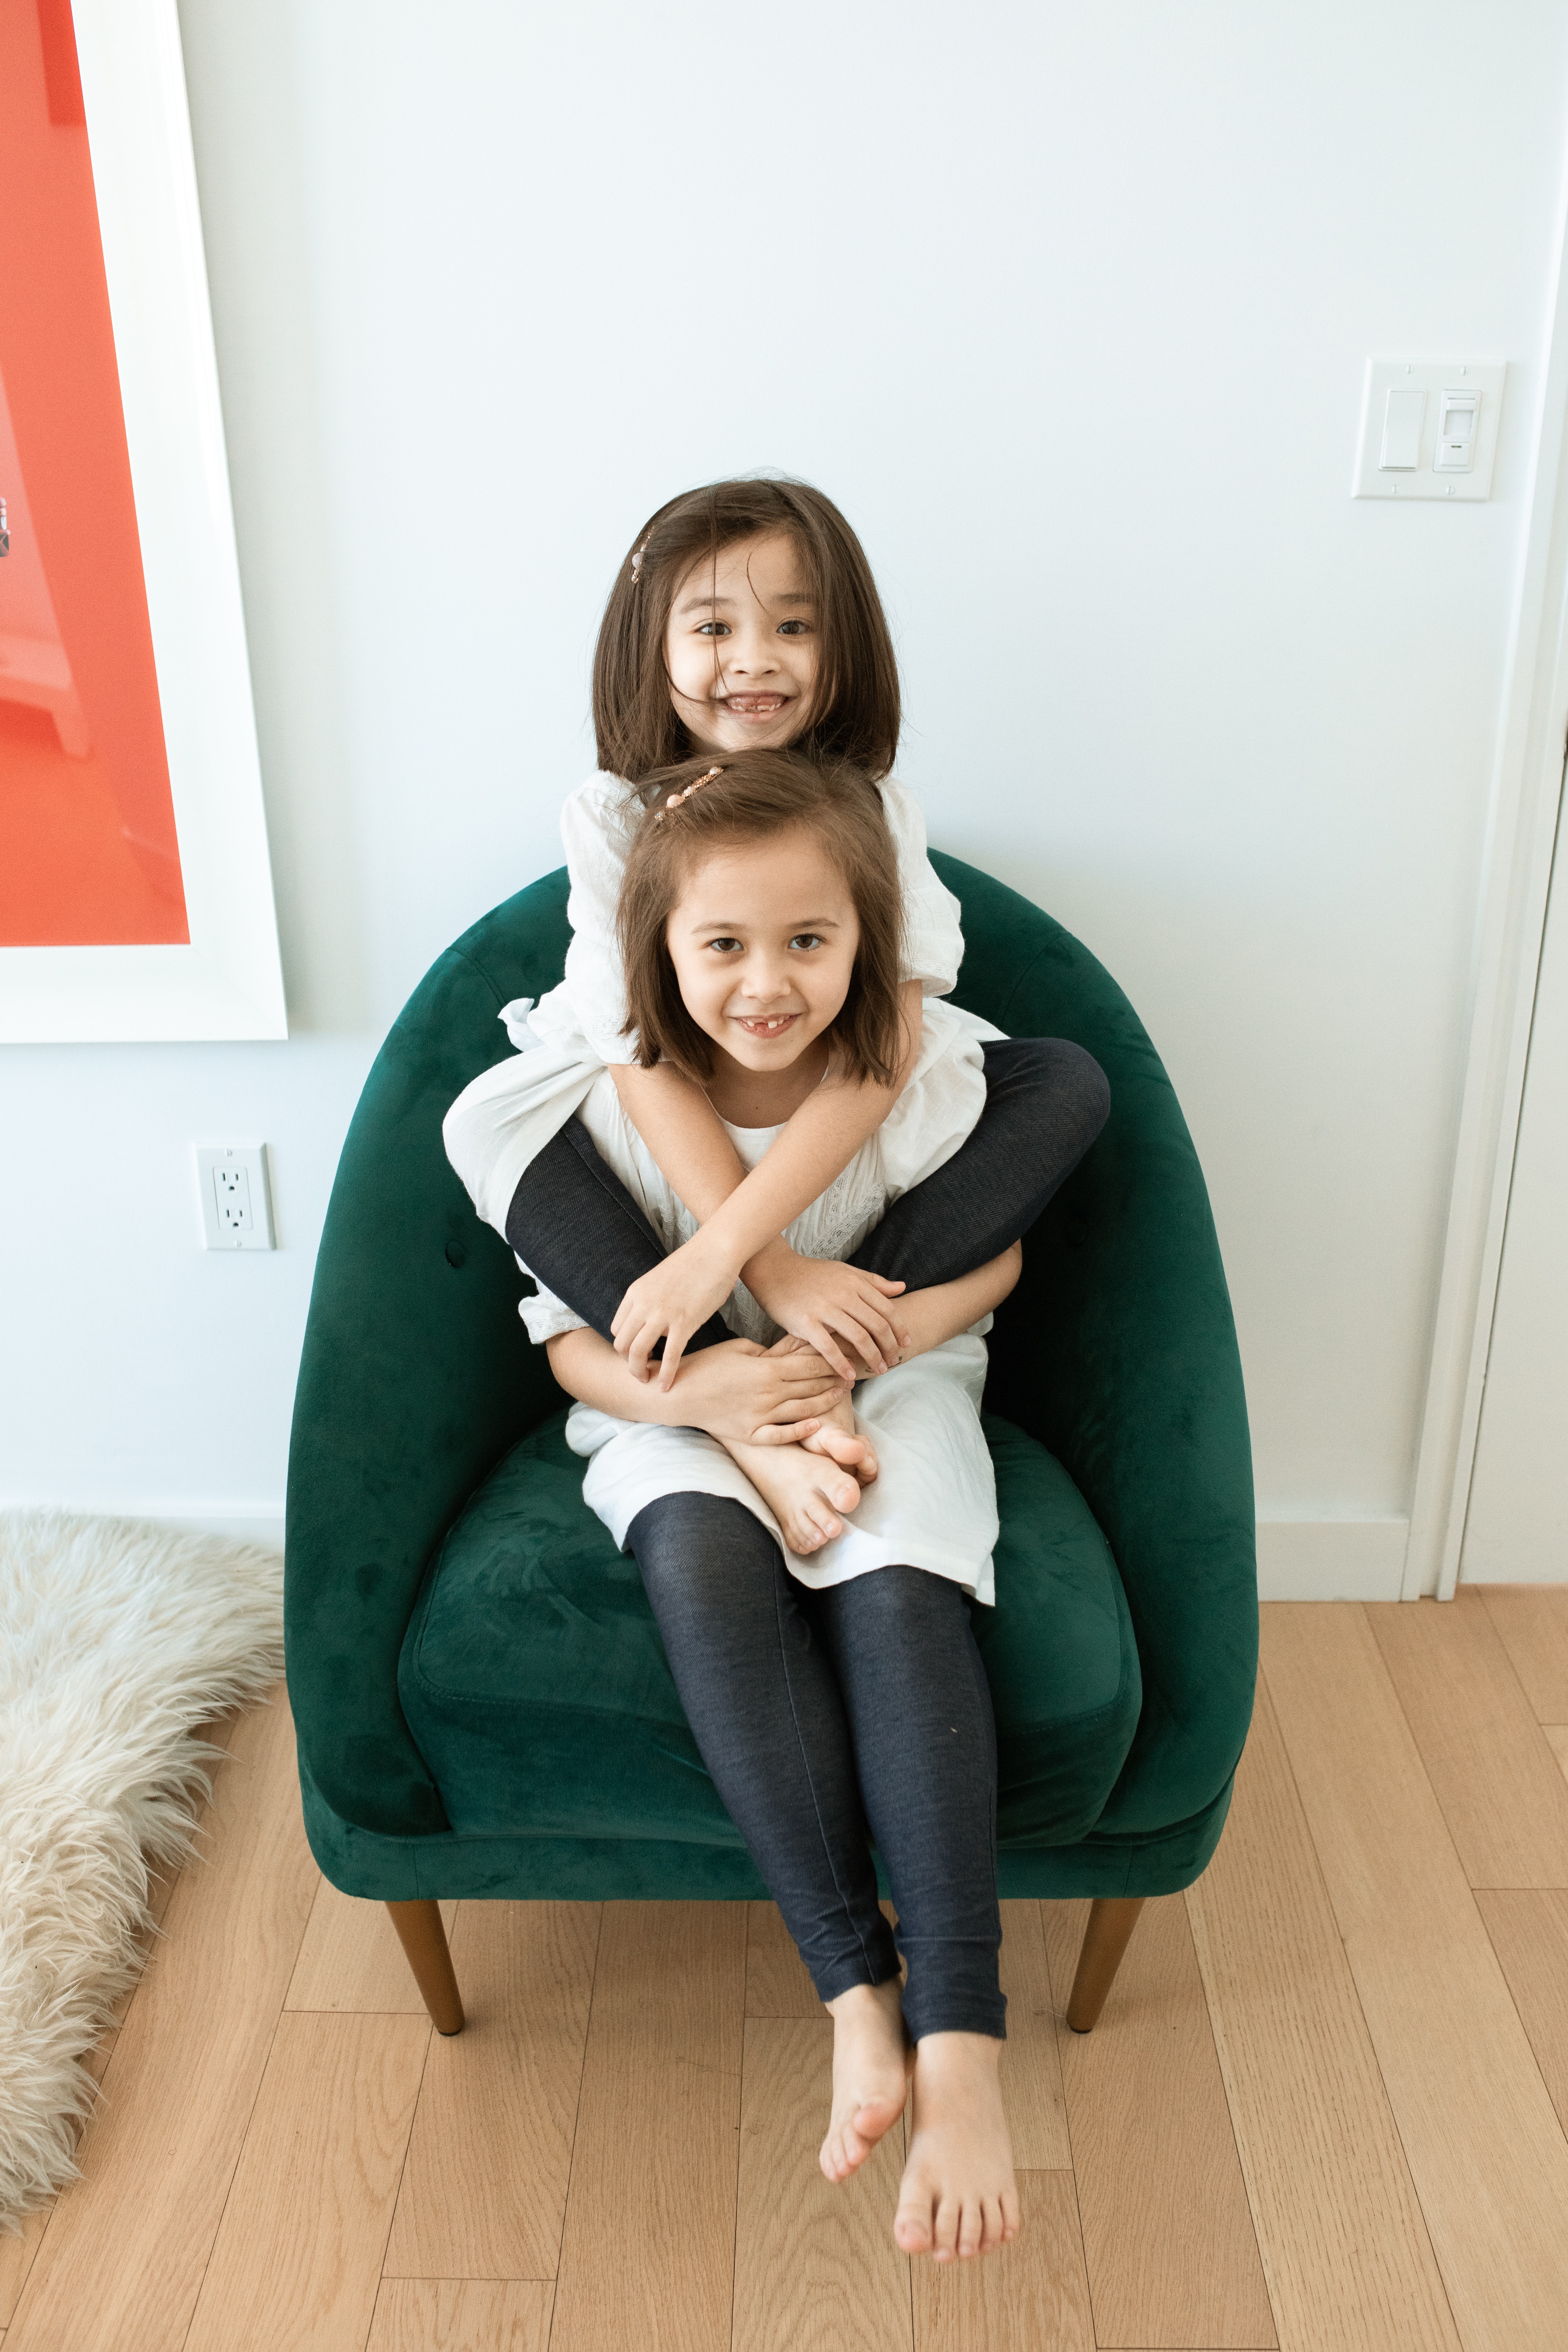 A Girl Piggy Back Riding Another Girl While Sitting on Green Armchair